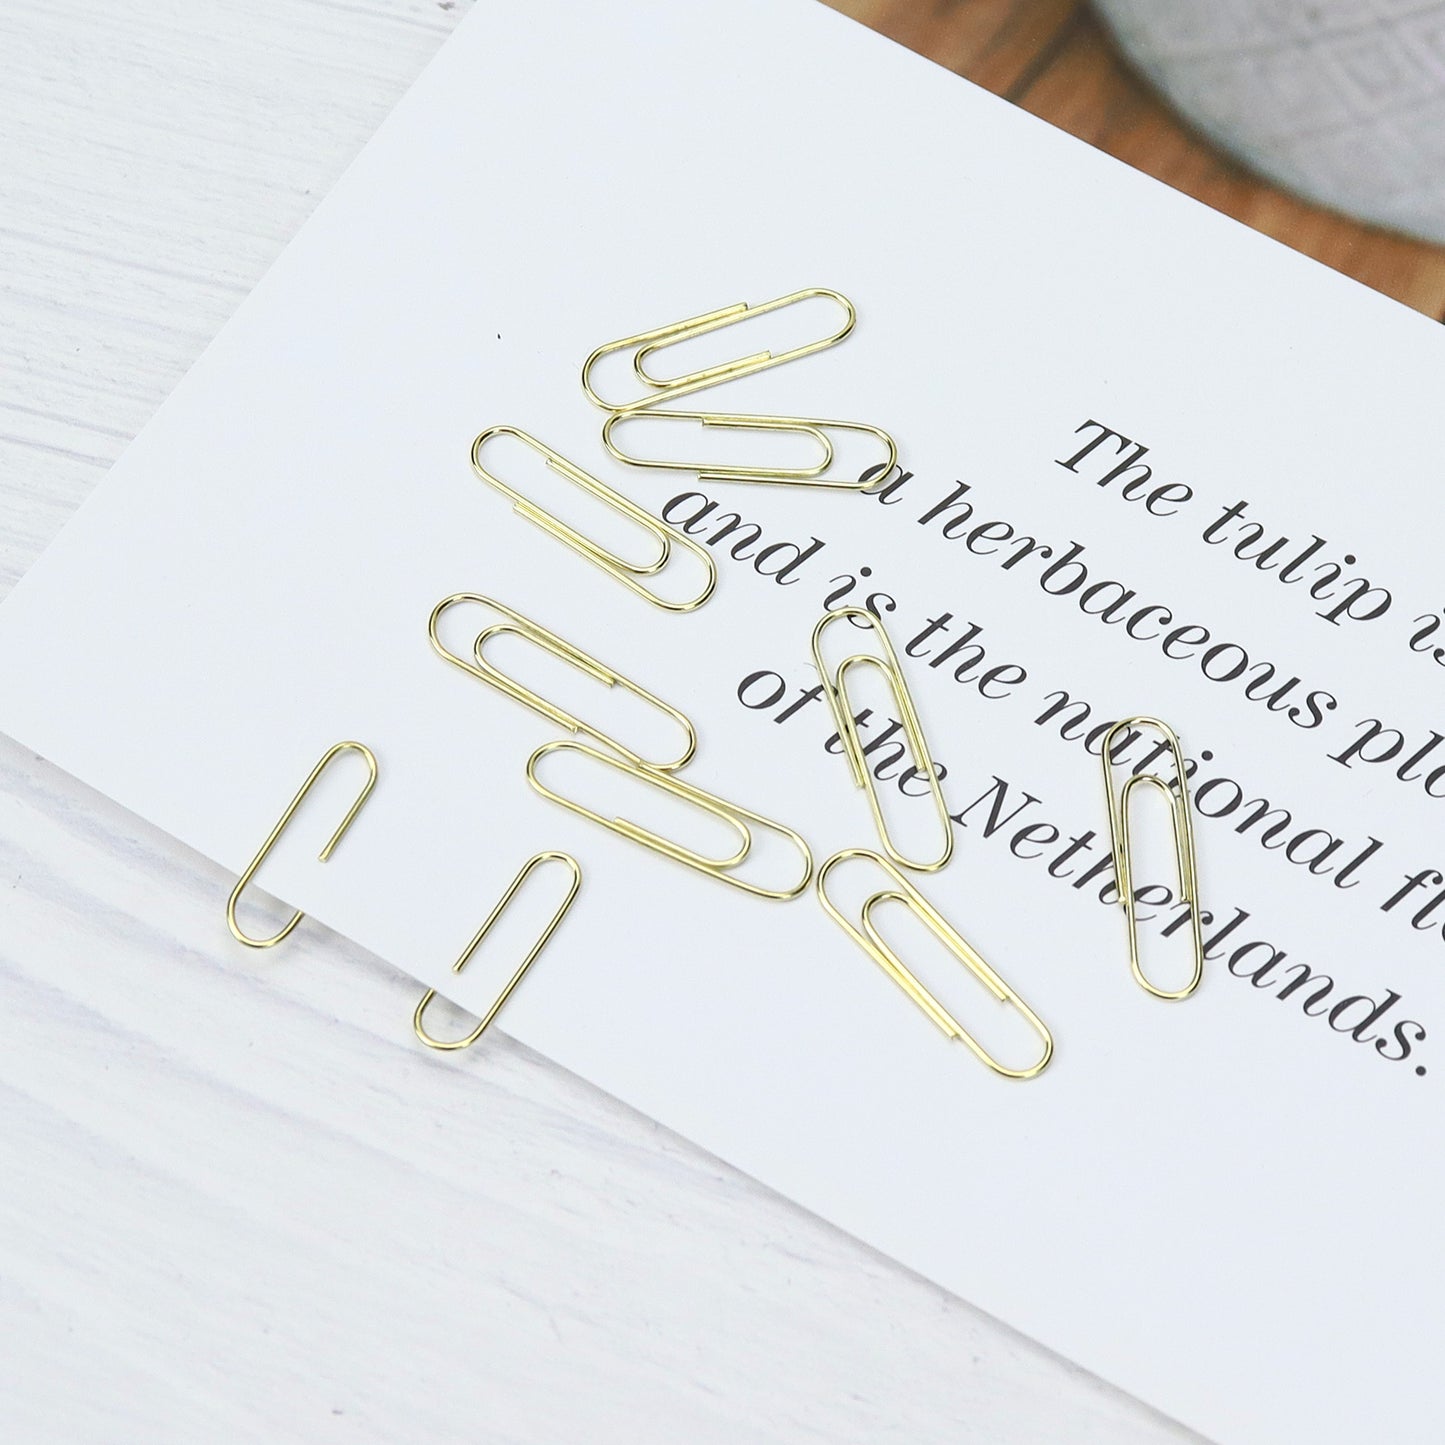 Gold Paper Clips Holder（28mm, 100 Clips per Box）